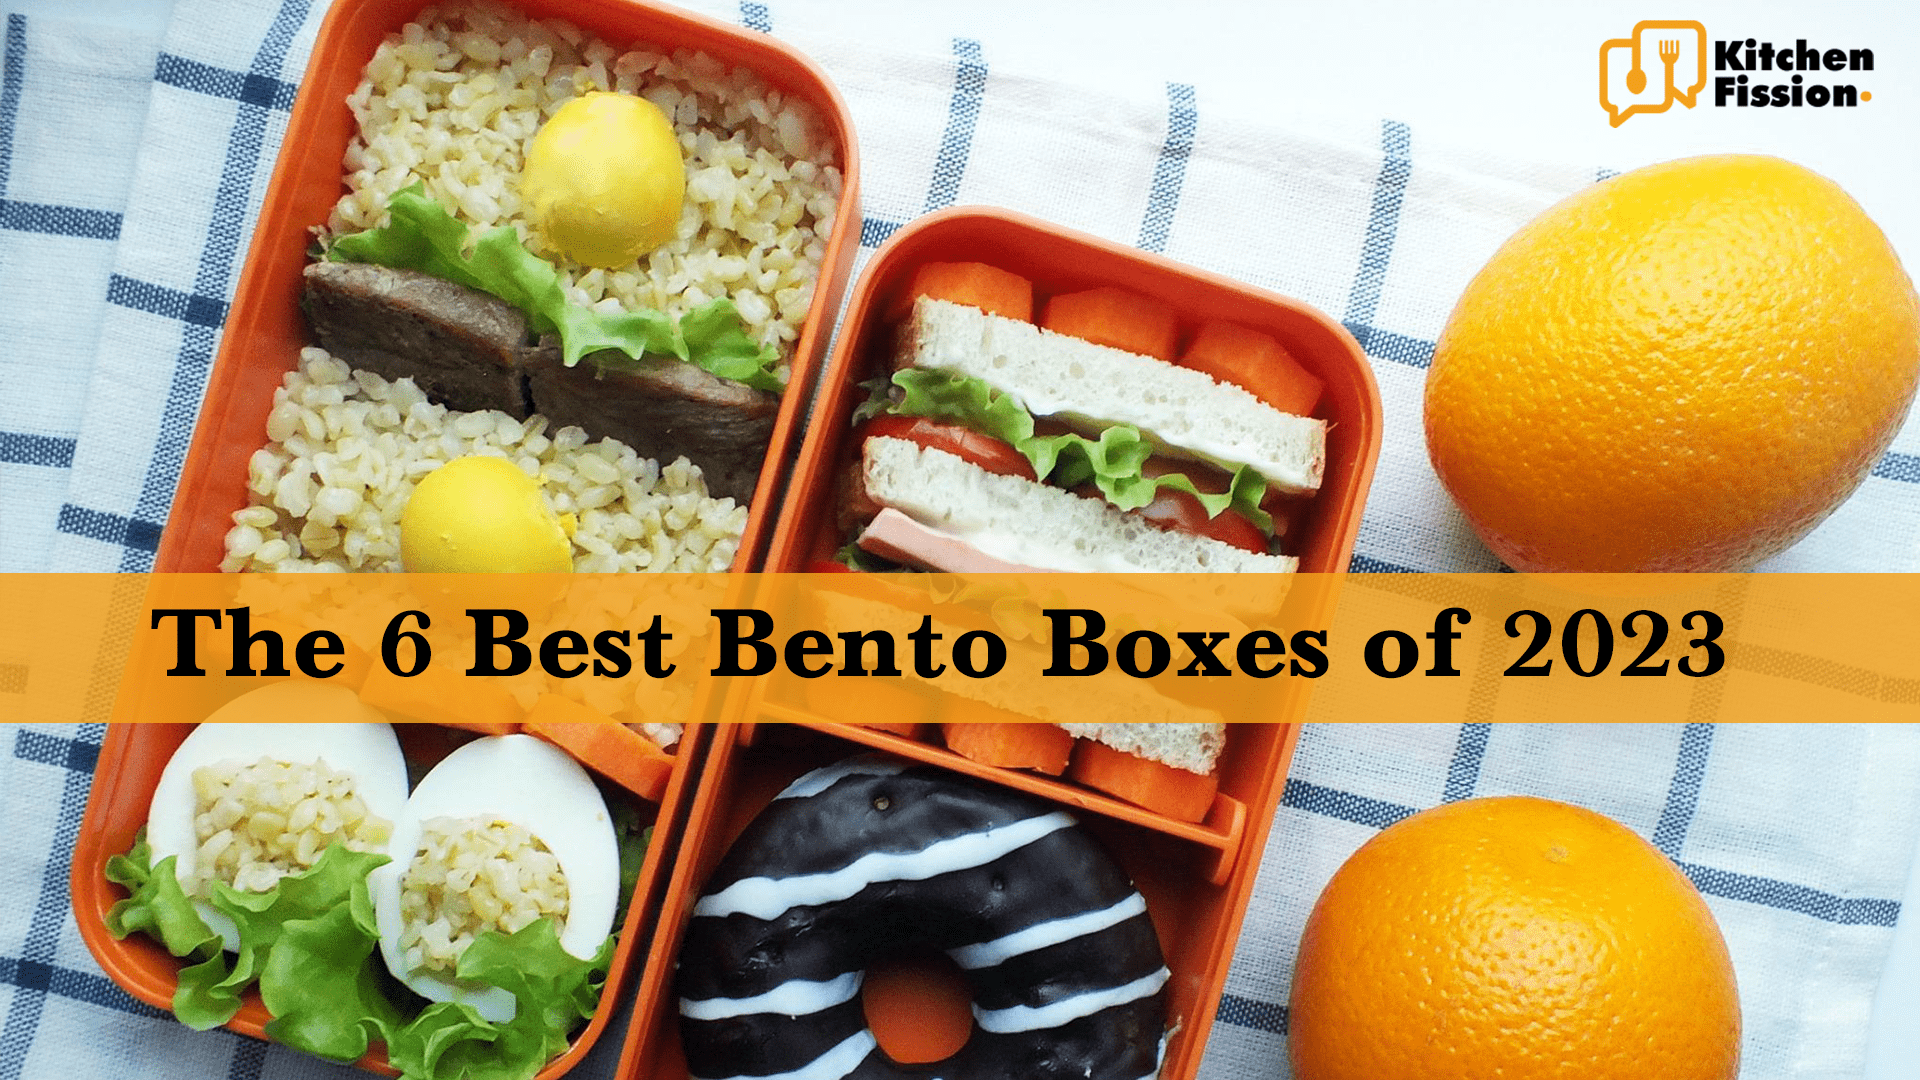 The 6 Best Bento Boxes of 2023